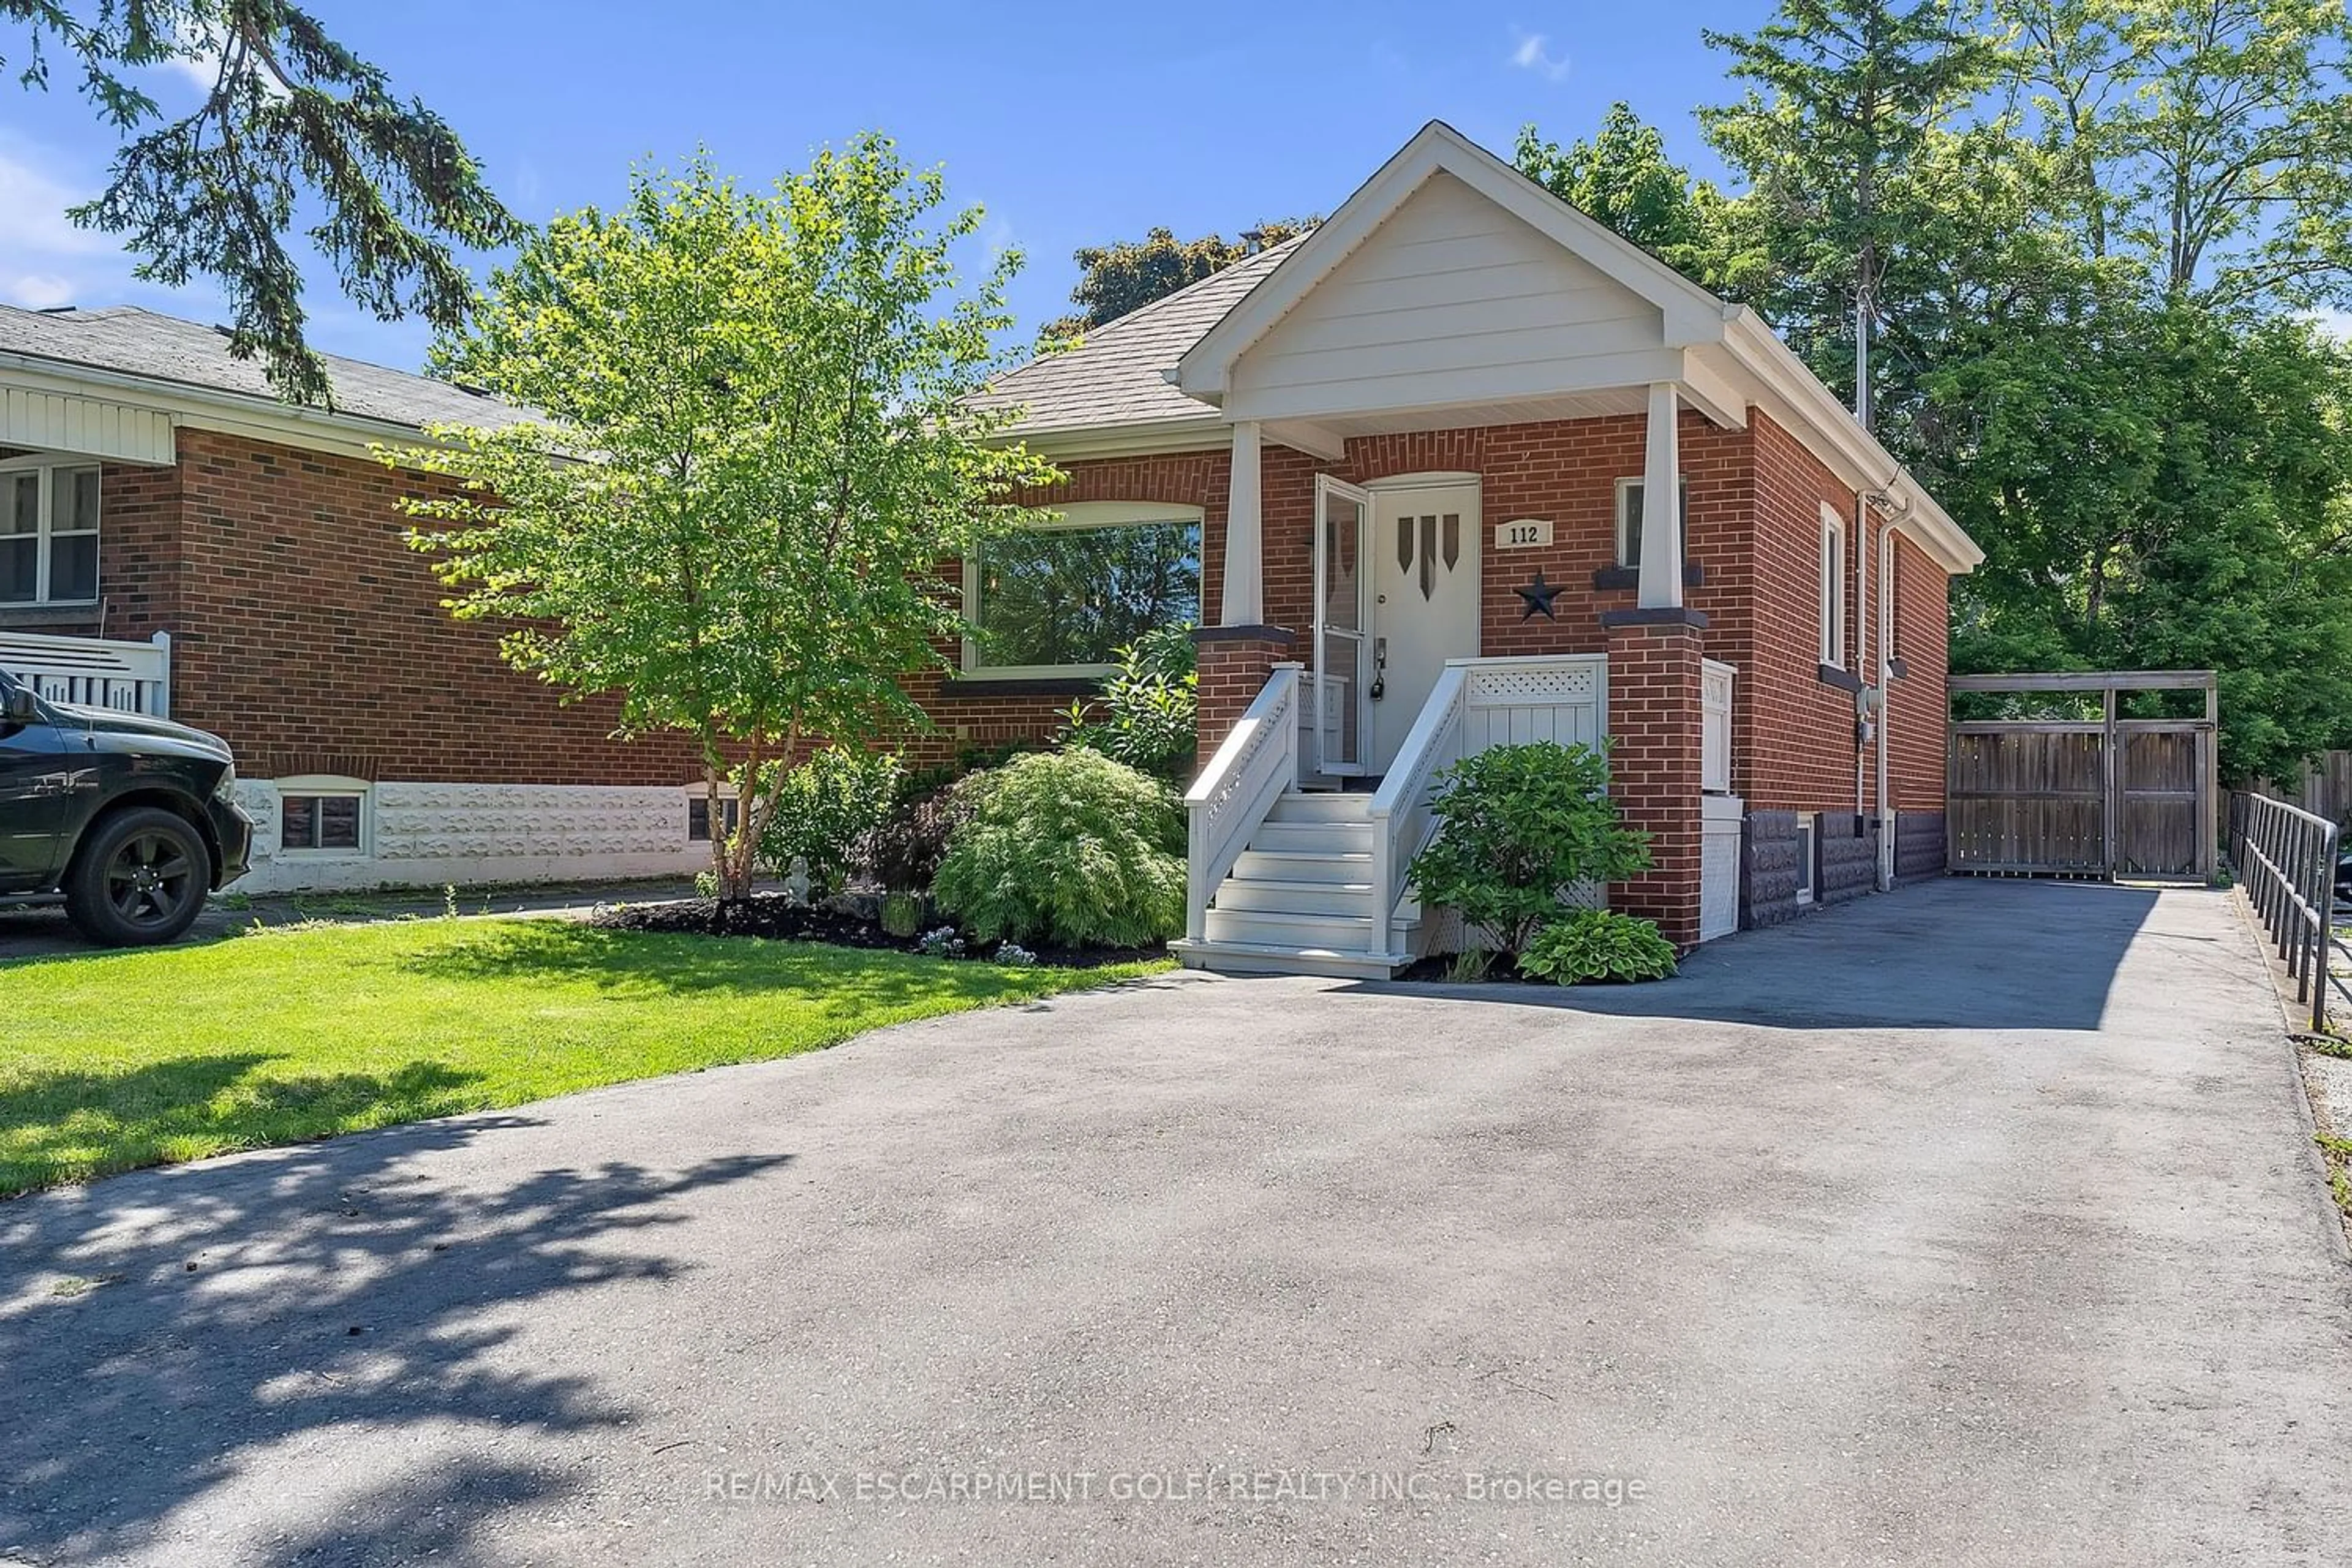 Home with brick exterior material for 112 Prince George Ave, Hamilton Ontario L9A 2W3